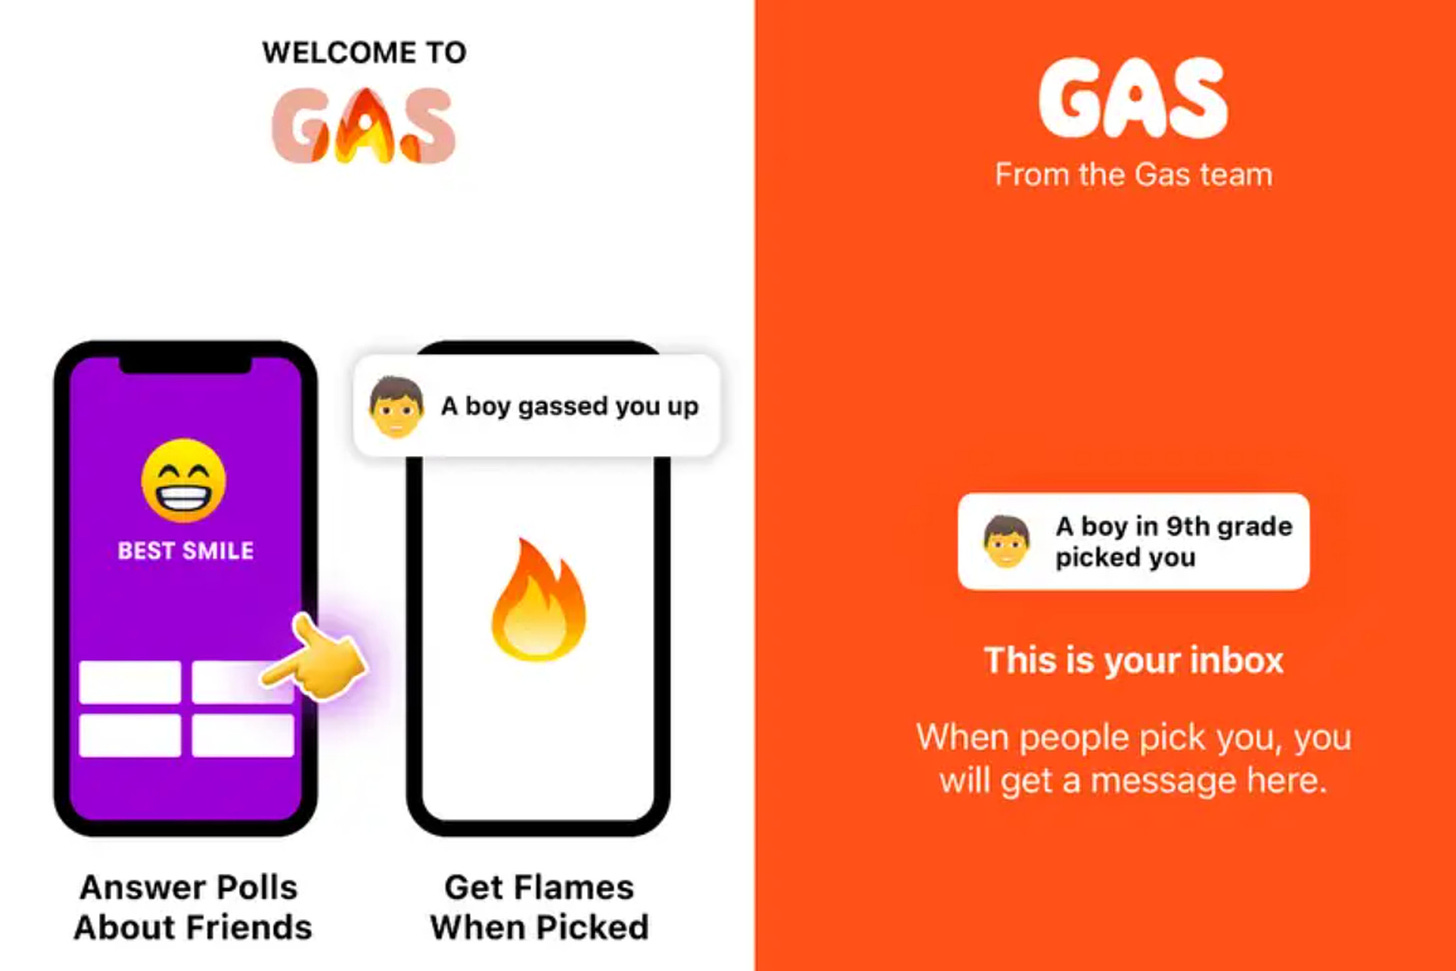 Screenshots of the gas app showing polls and compliments between friends